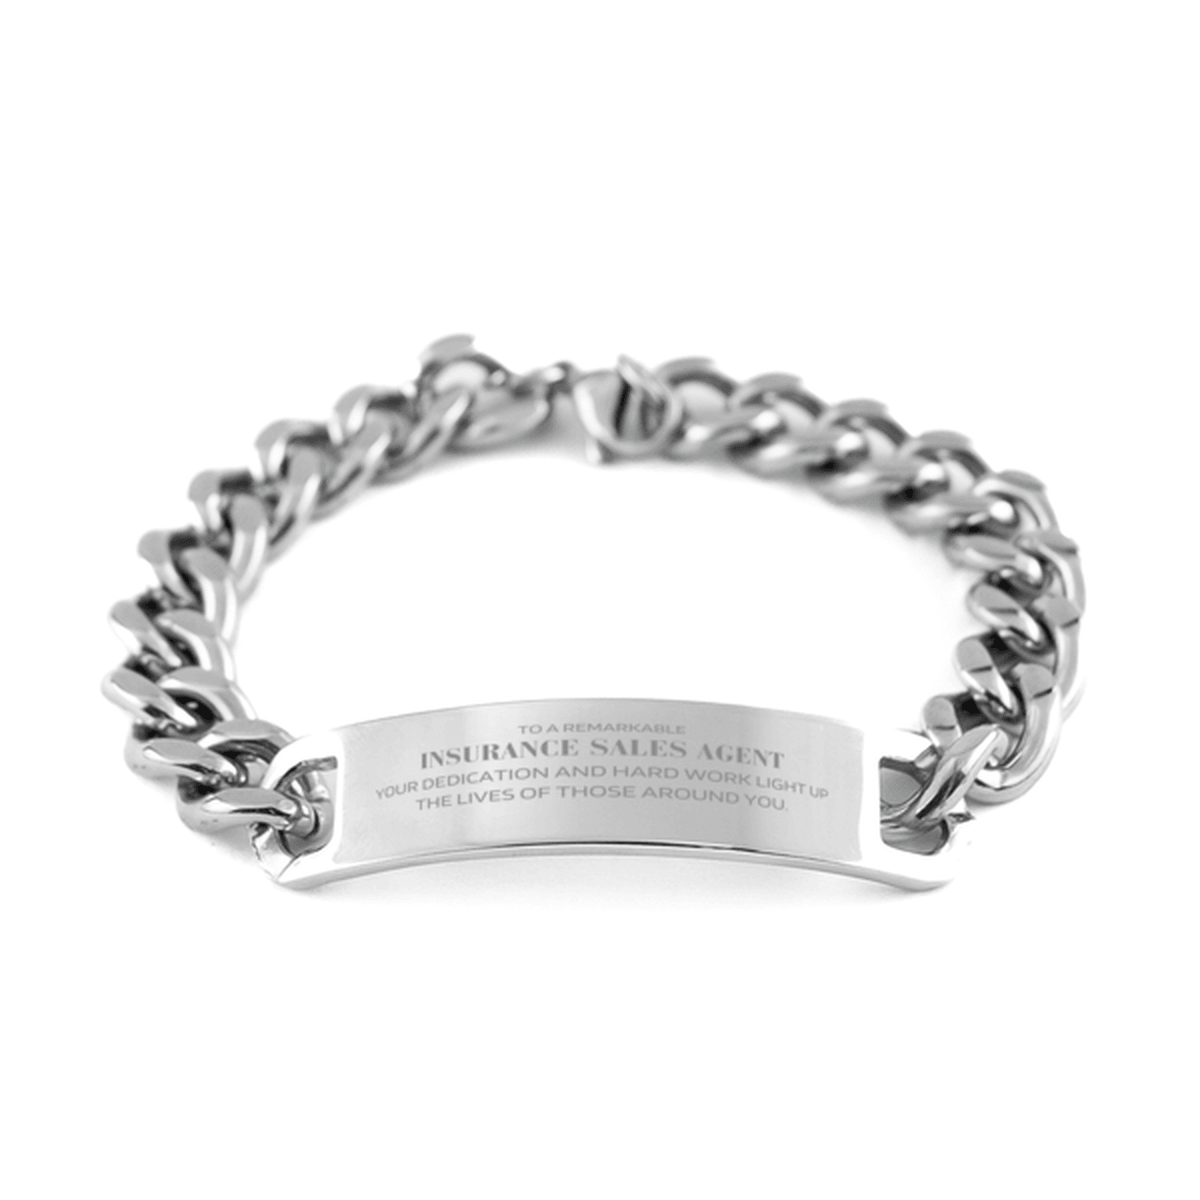 Remarkable Insurance Sales Agent Gifts, Your dedication and hard work, Inspirational Birthday Christmas Unique Cuban Chain Stainless Steel Bracelet For Insurance Sales Agent, Coworkers, Men, Women, Friends - Mallard Moon Gift Shop